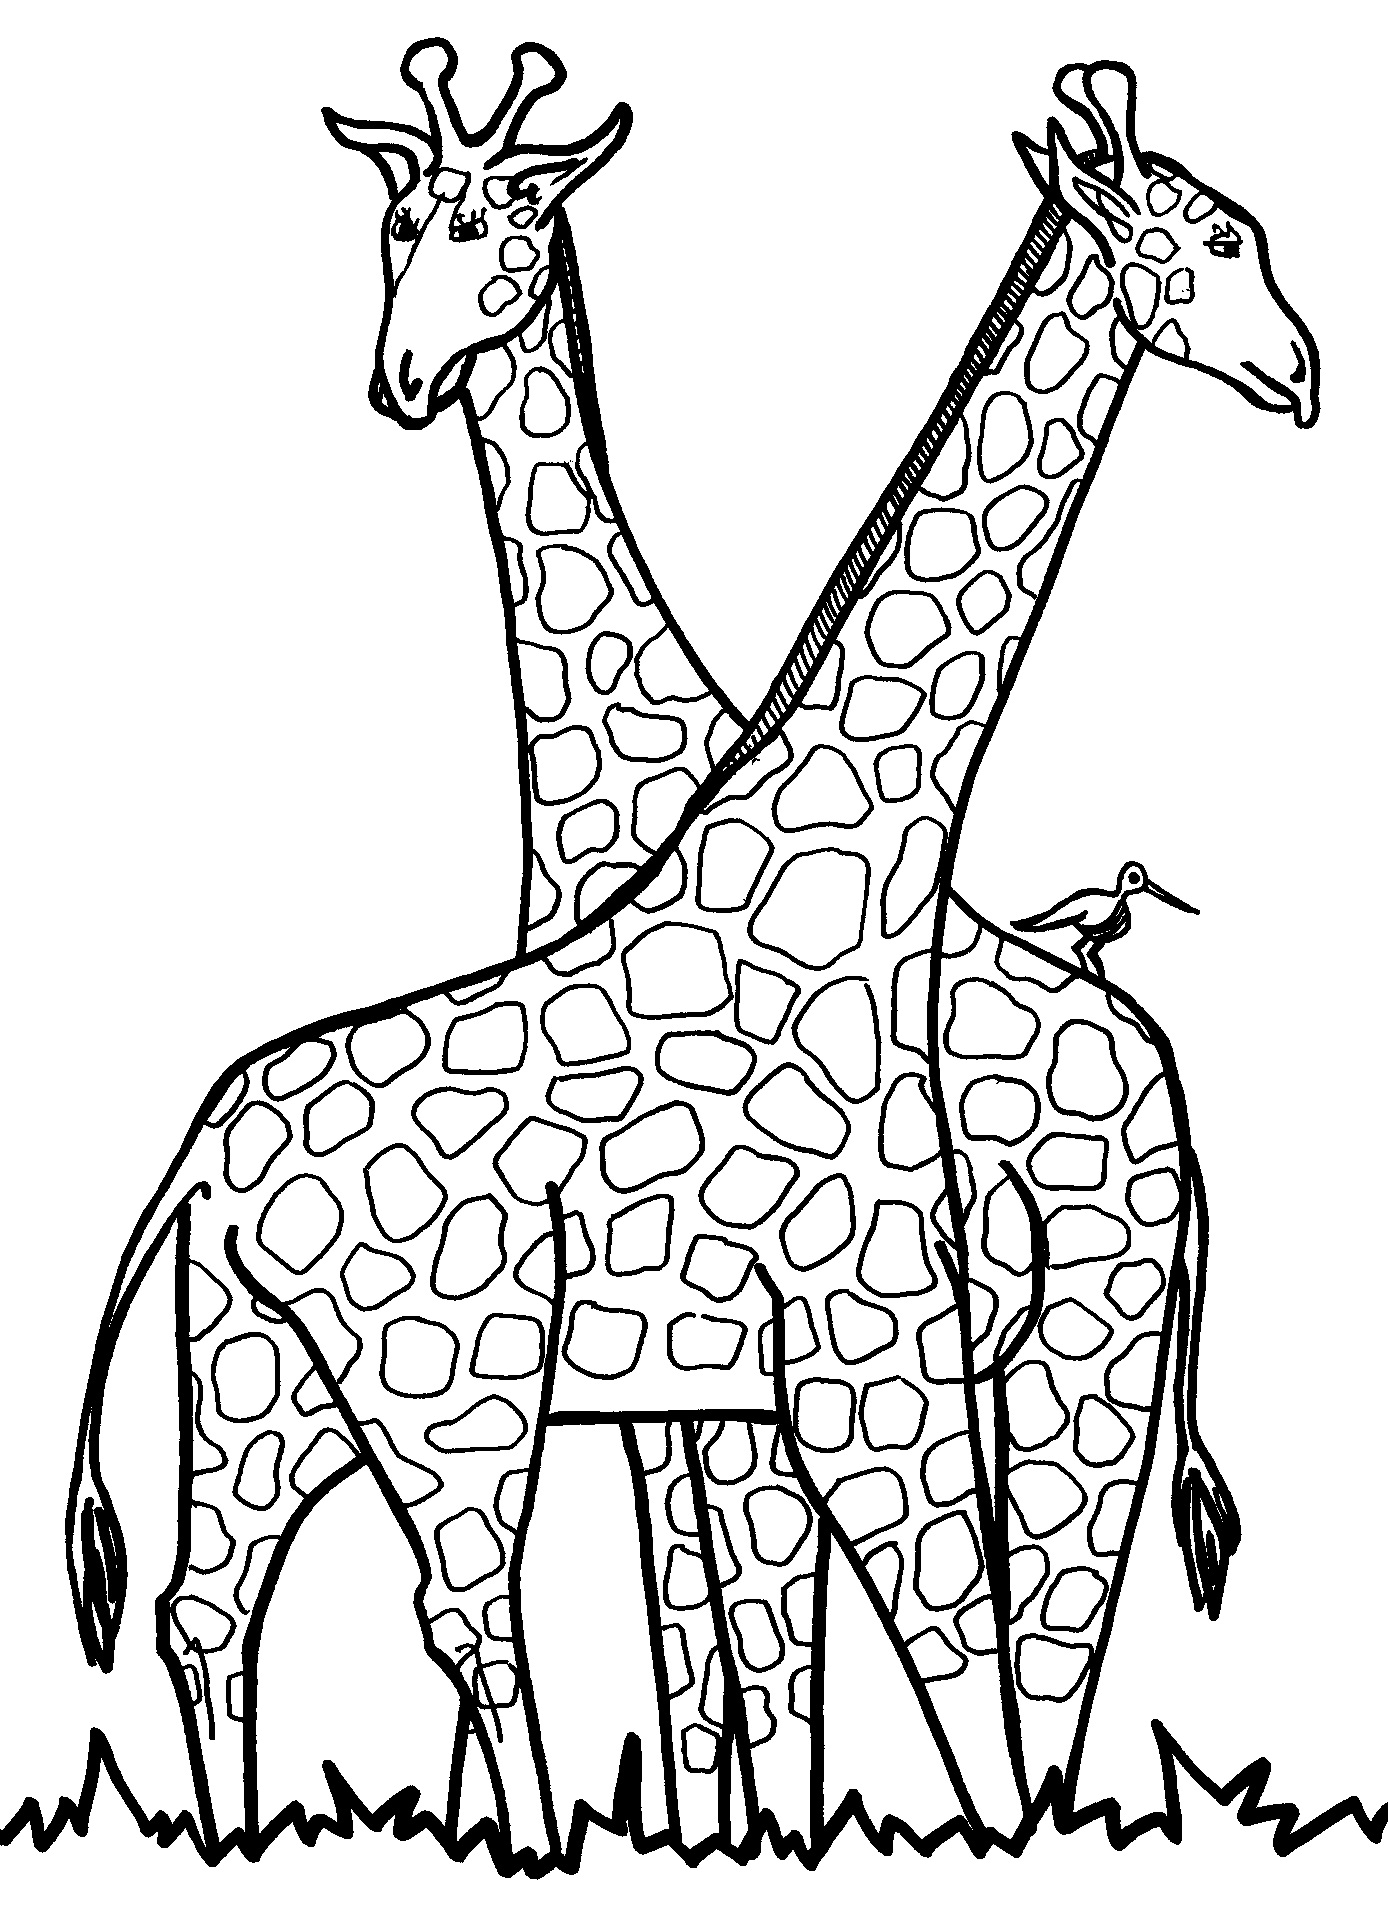 Coloring Pages of a Giraffe